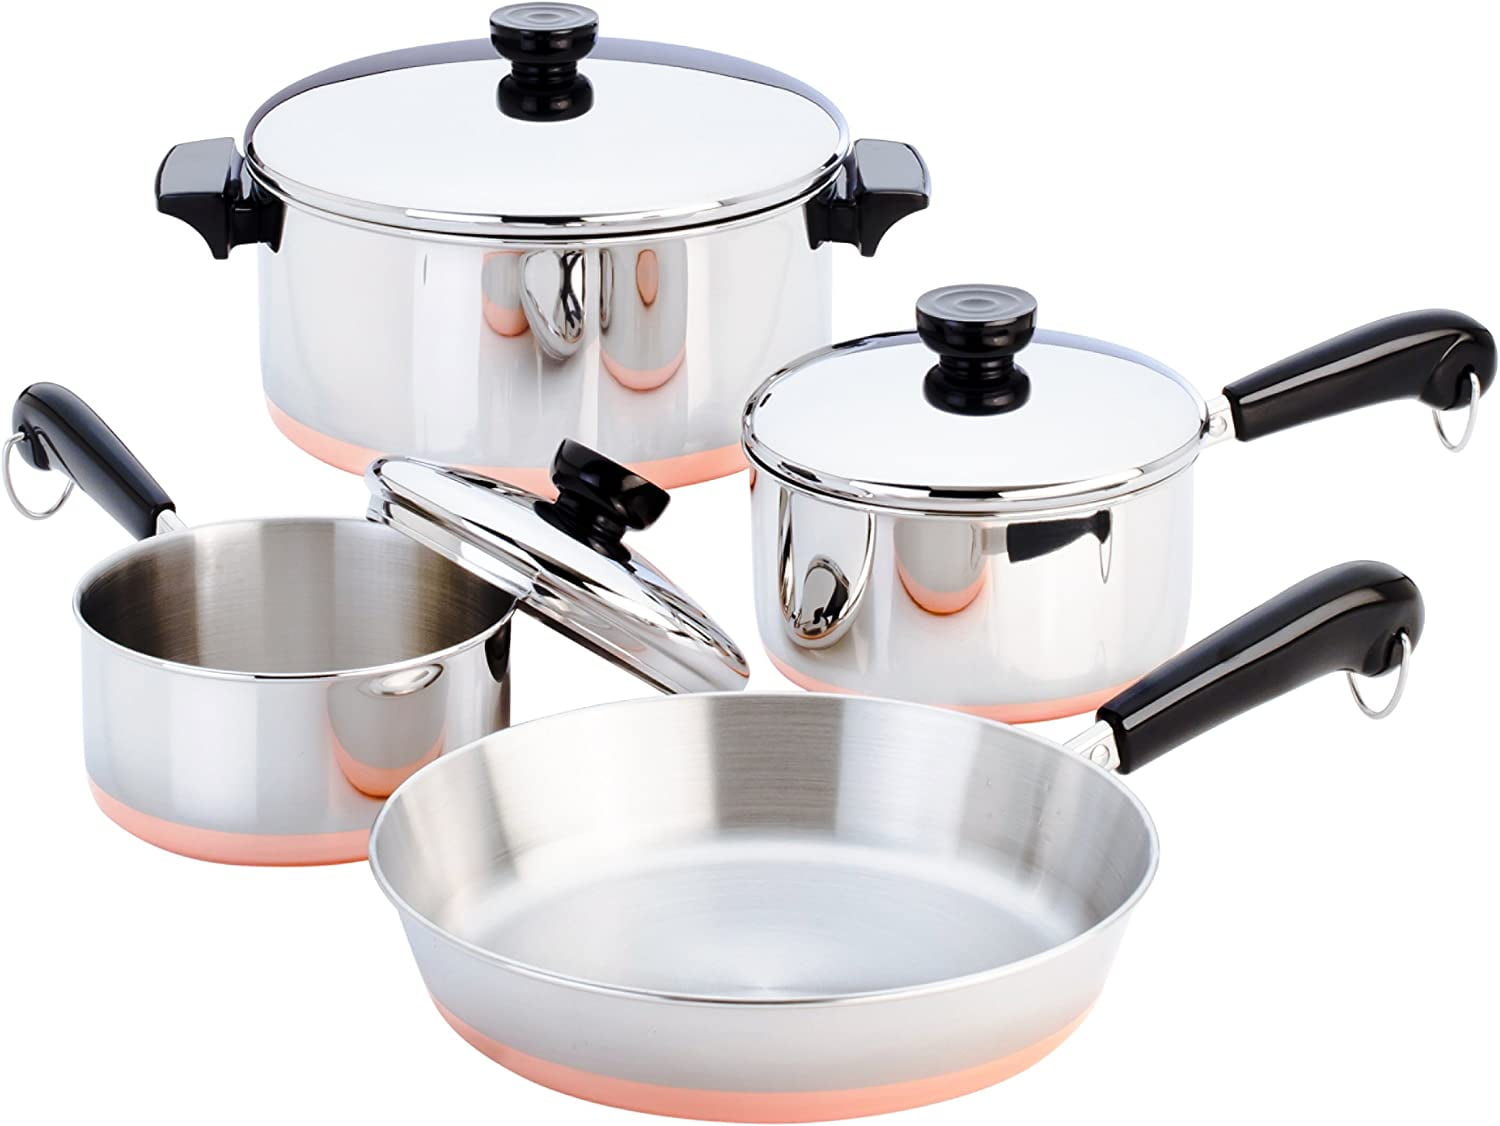 Iconic REVERE® Cookware Returns With Two Lines to Help New